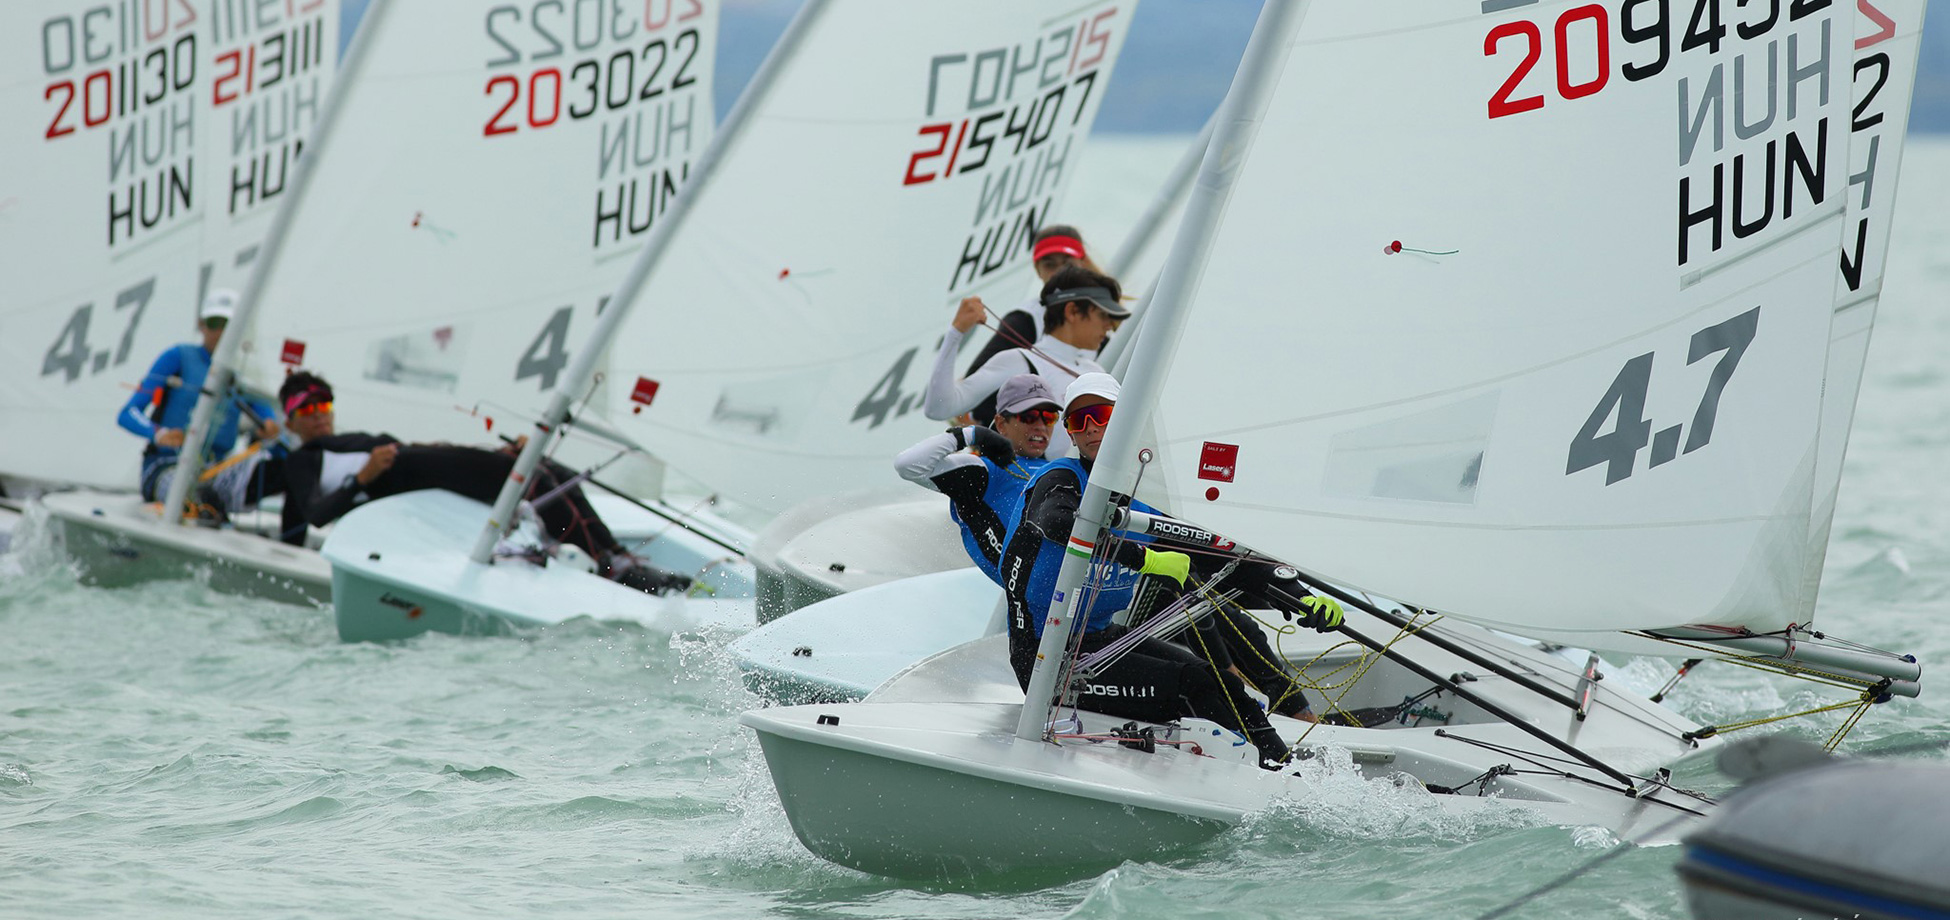 laser europa cup hungary day 1